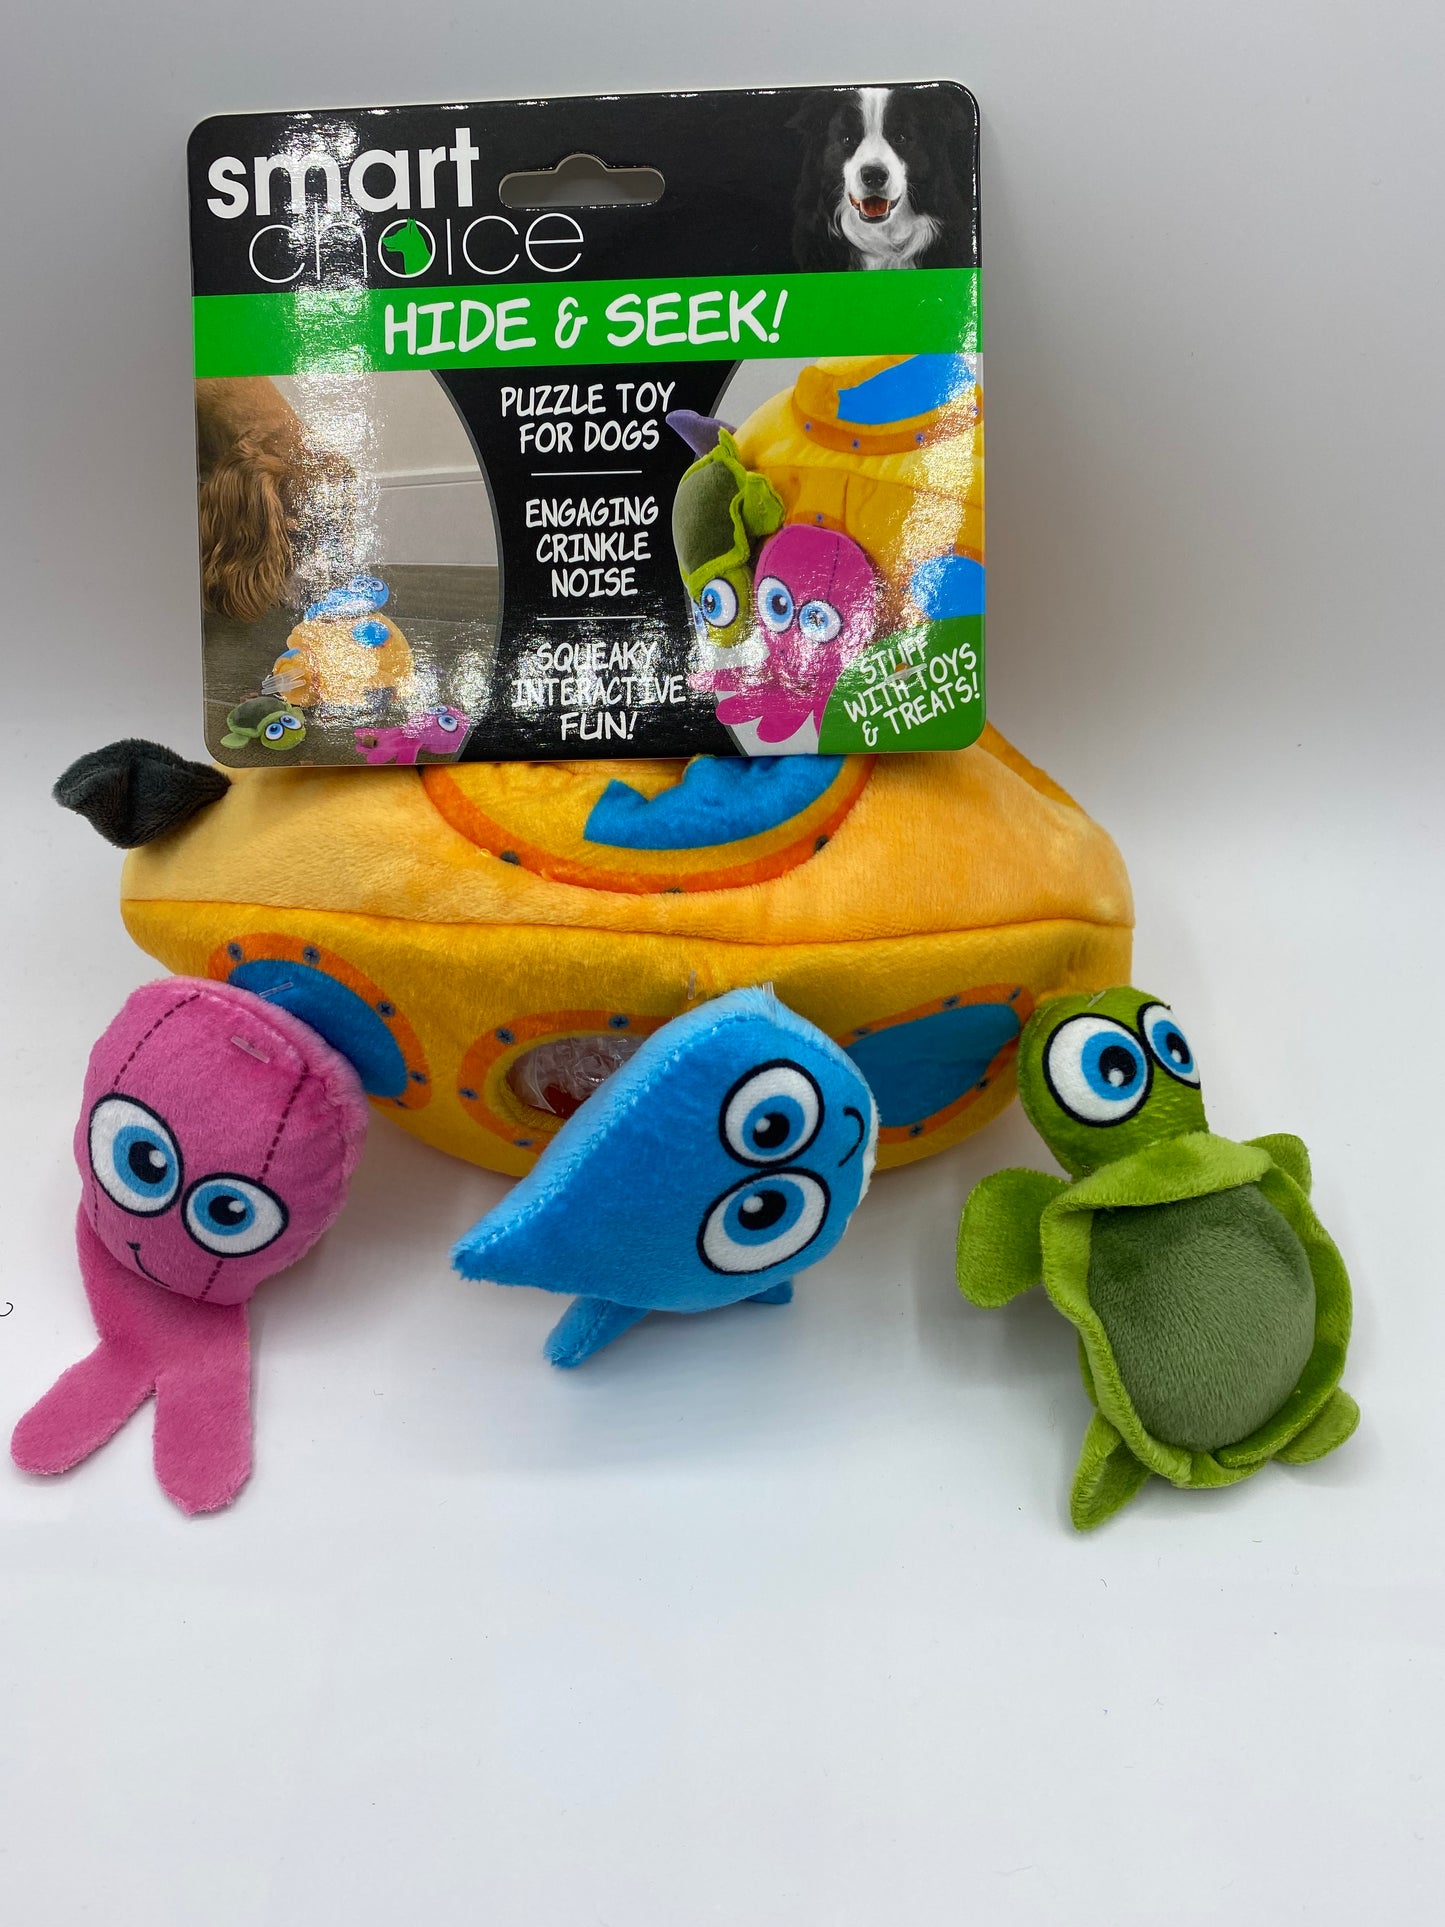 Hide and seek plush Dog Toy Submarine and Cave approx size 21cm x 12cm